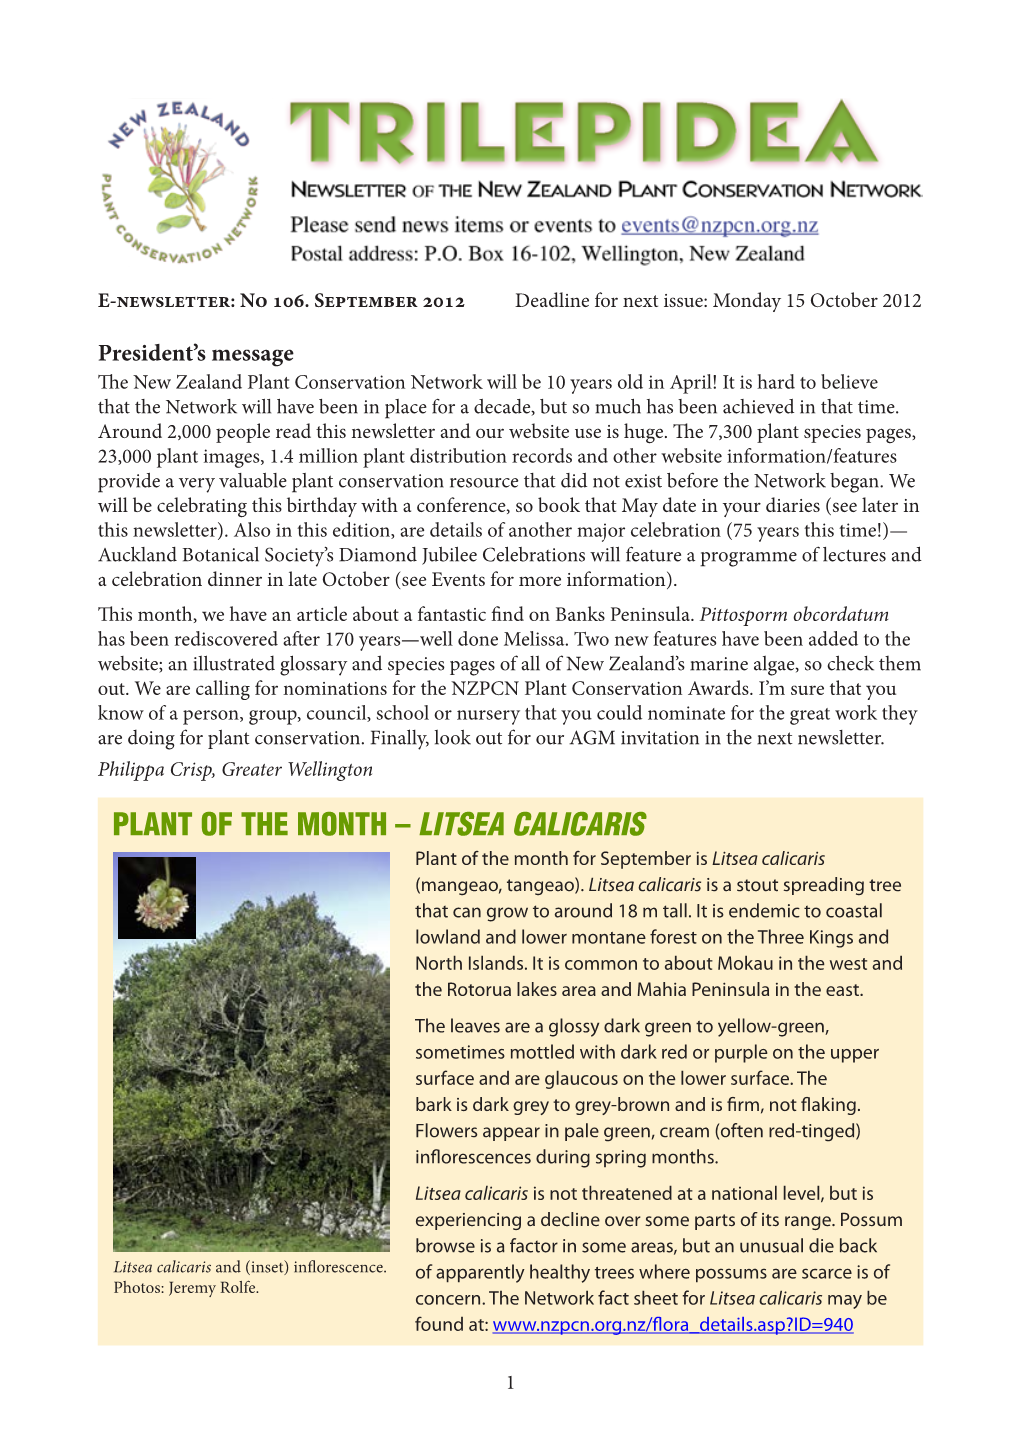 PLANT of the MONTH – LITSEA CALICARIS Plant of the Month for September Is Litsea Calicaris (Mangeao, Tangeao)